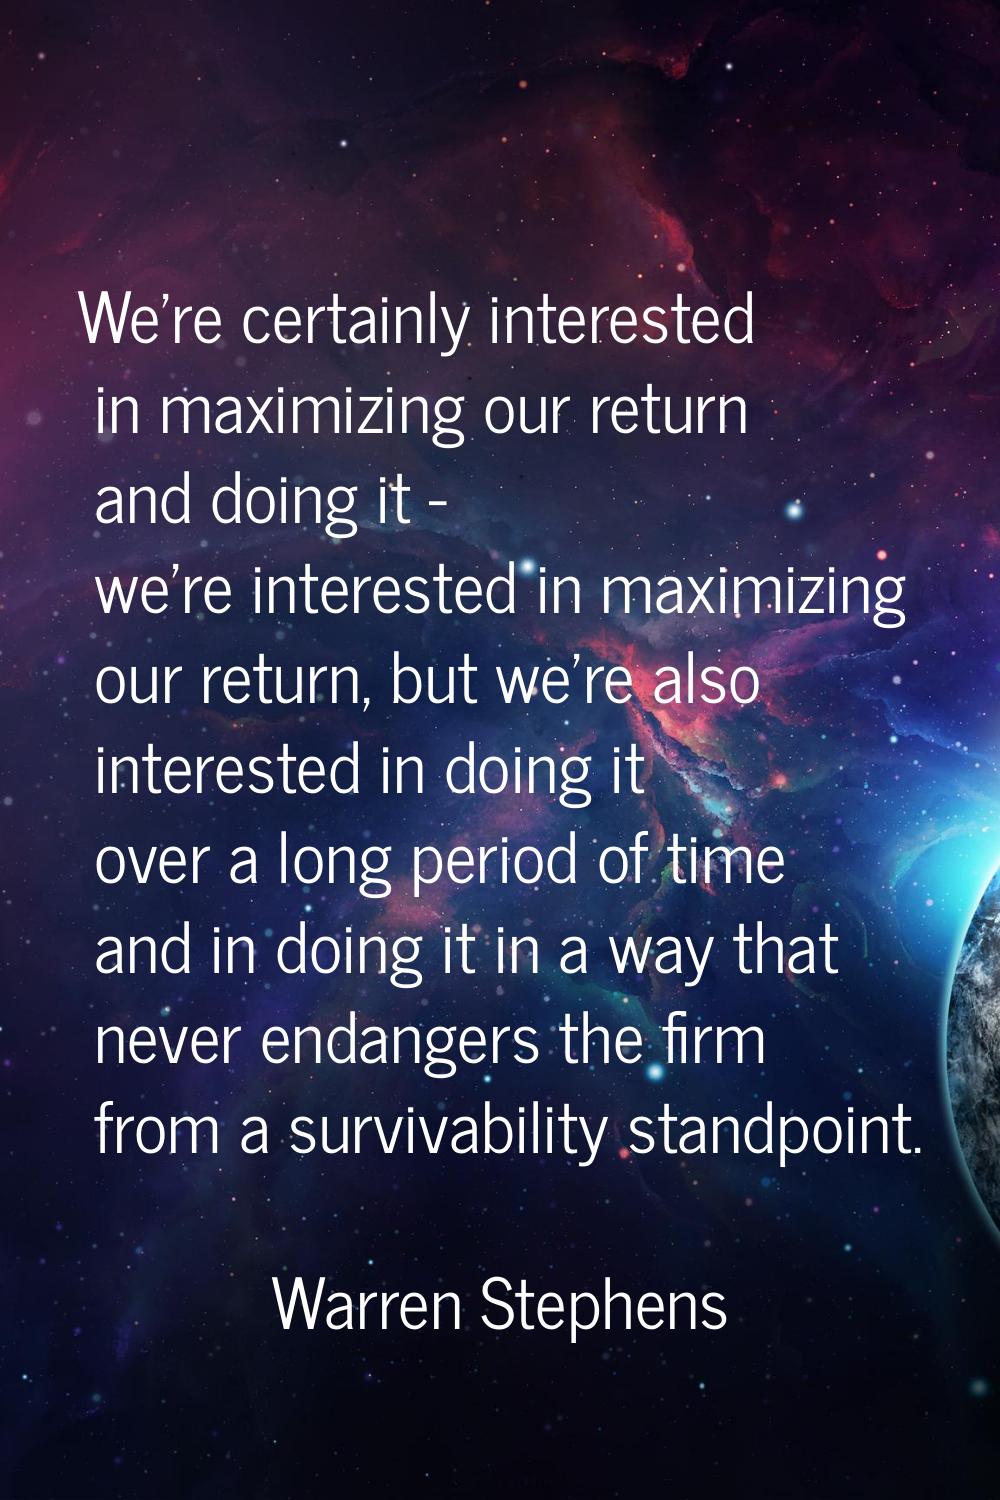 We're certainly interested in maximizing our return and doing it - we're interested in maximizing o